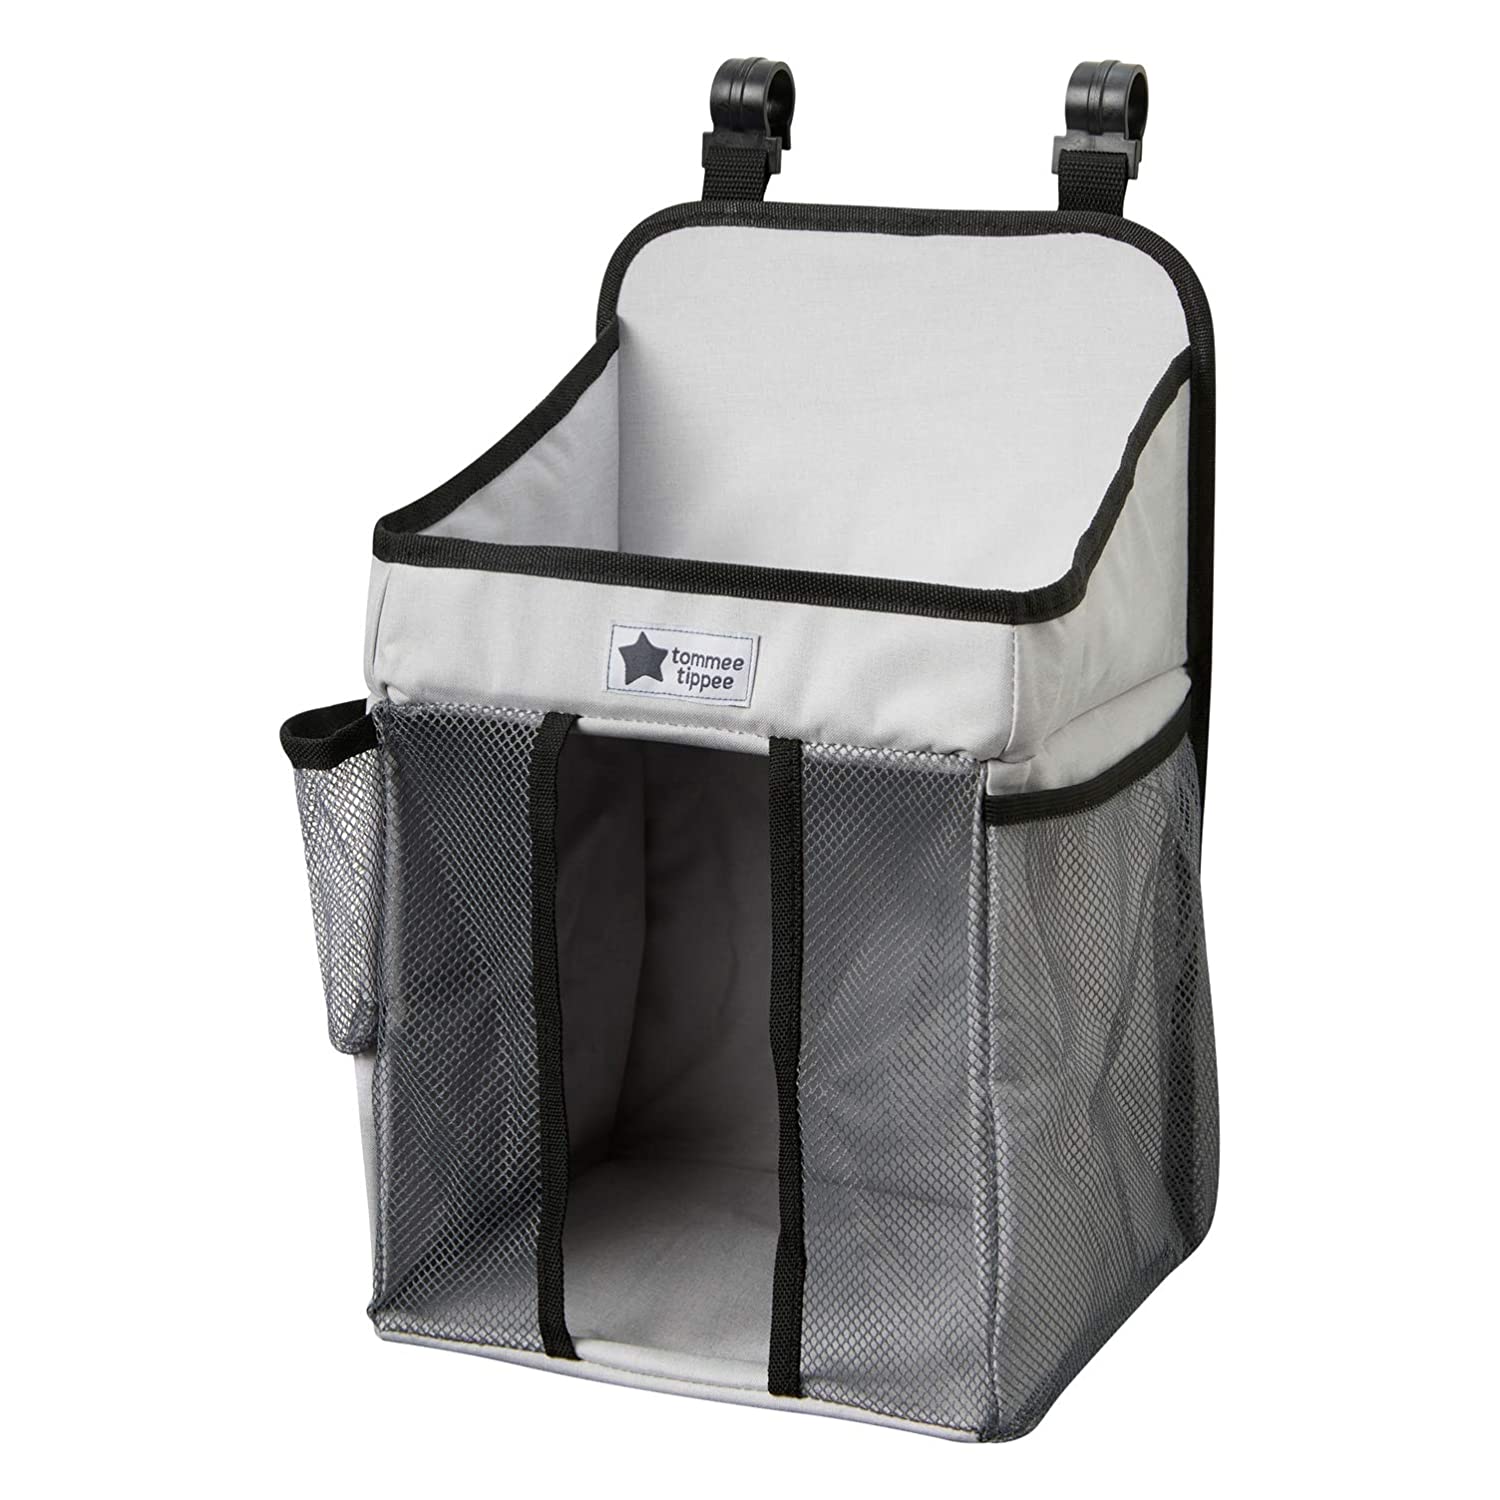 Tommee Tippee Easi Change Foldable Changing Table Organiser Holds up to 50 Nappies Grey/Black